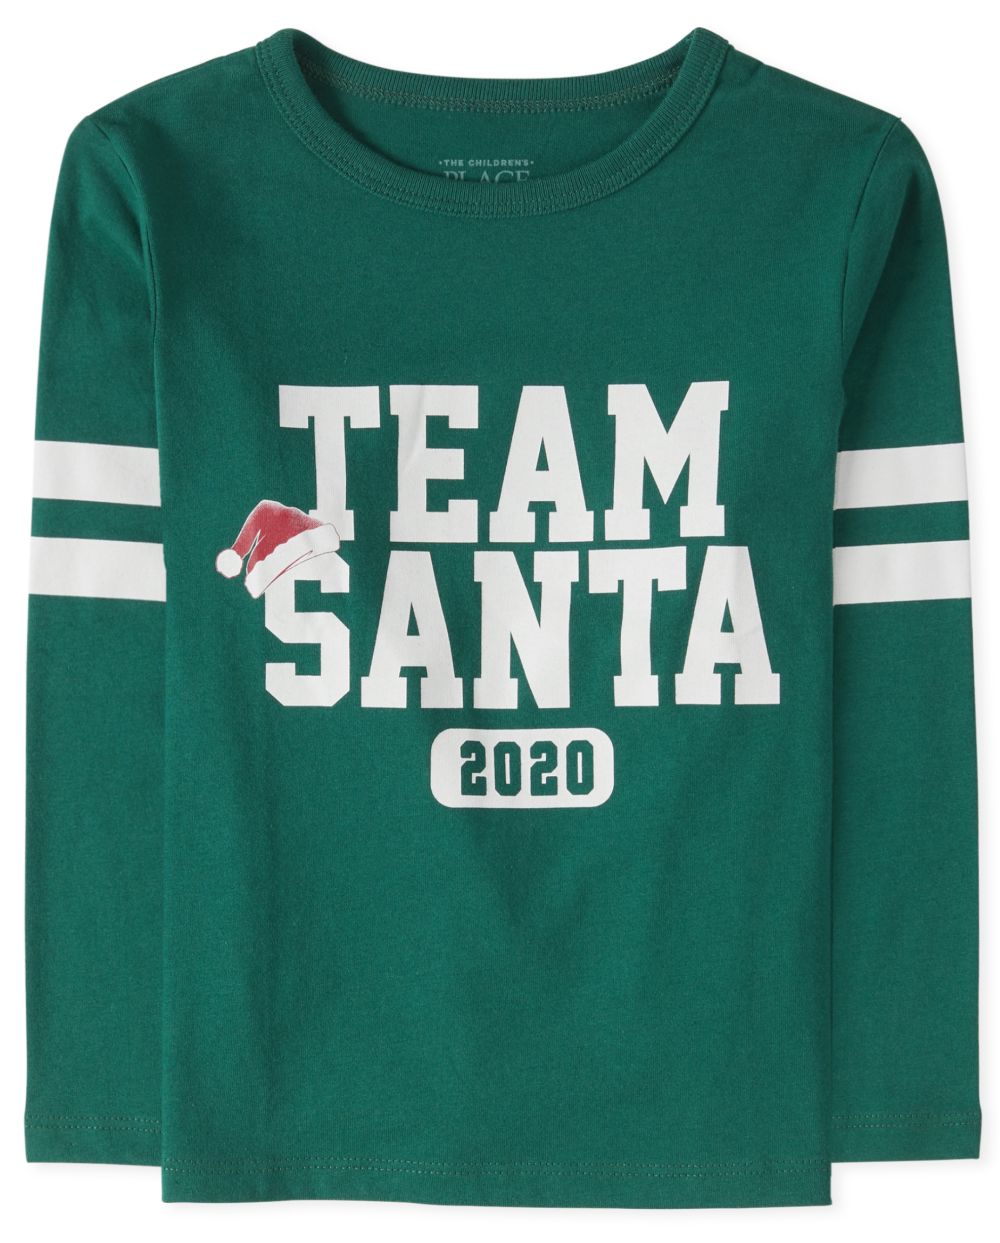 

s Unisex Baby And Toddler Matching Family Christmas Team Santa Graphic Tee - Green T-Shirt - The Children's Place